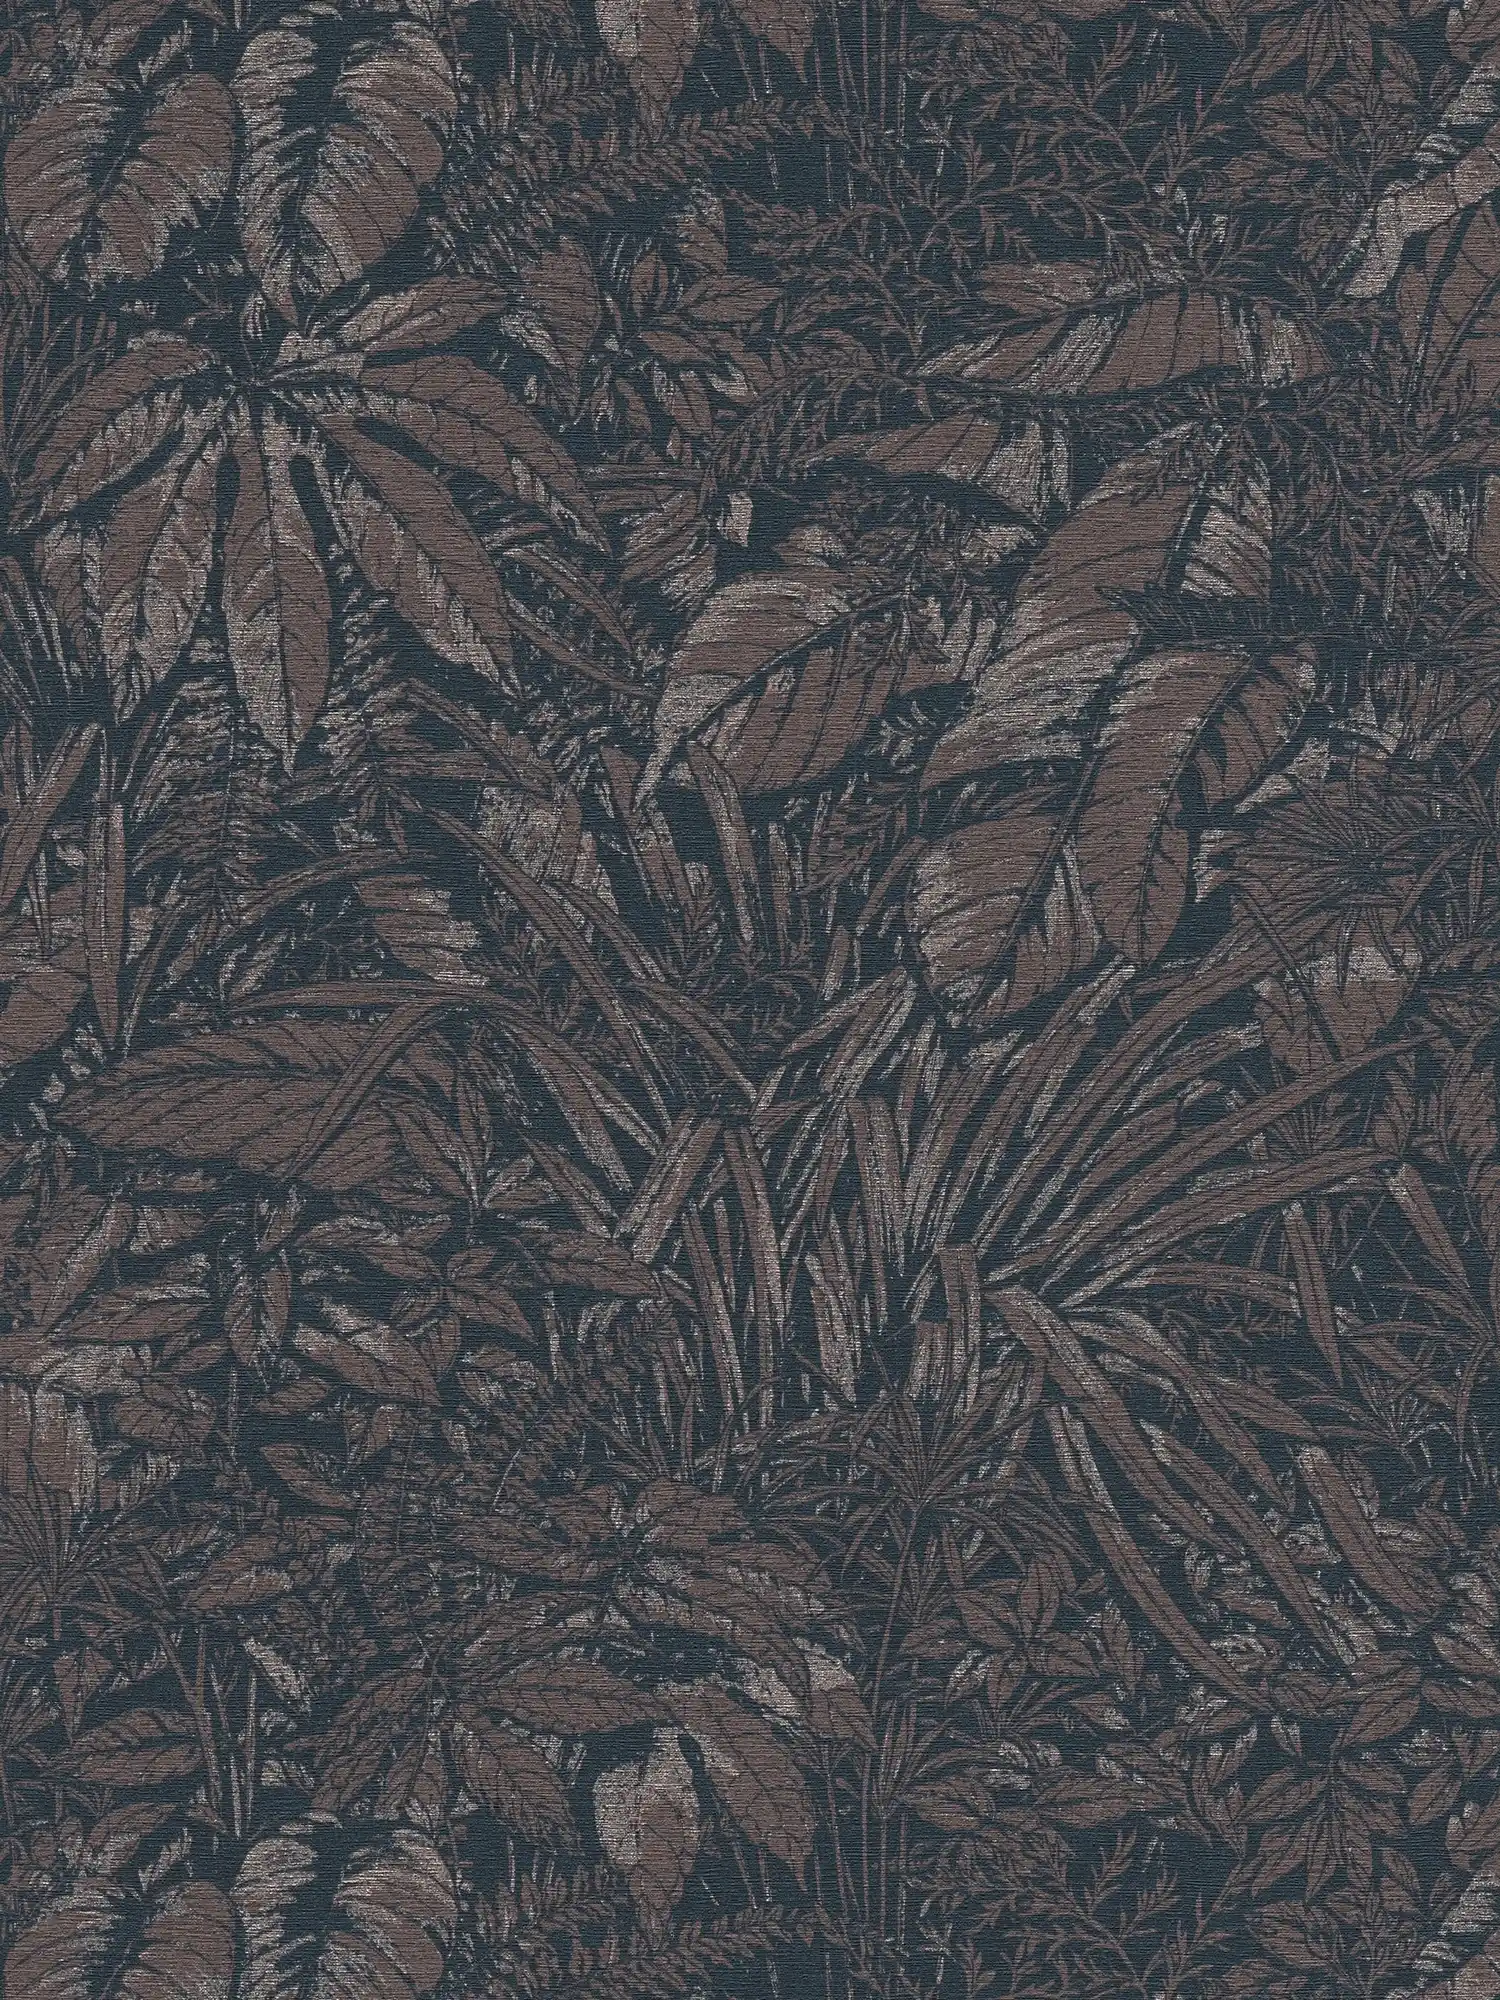 Jungle wallpaper light glossy with leaf pattern - brown, black, silver
